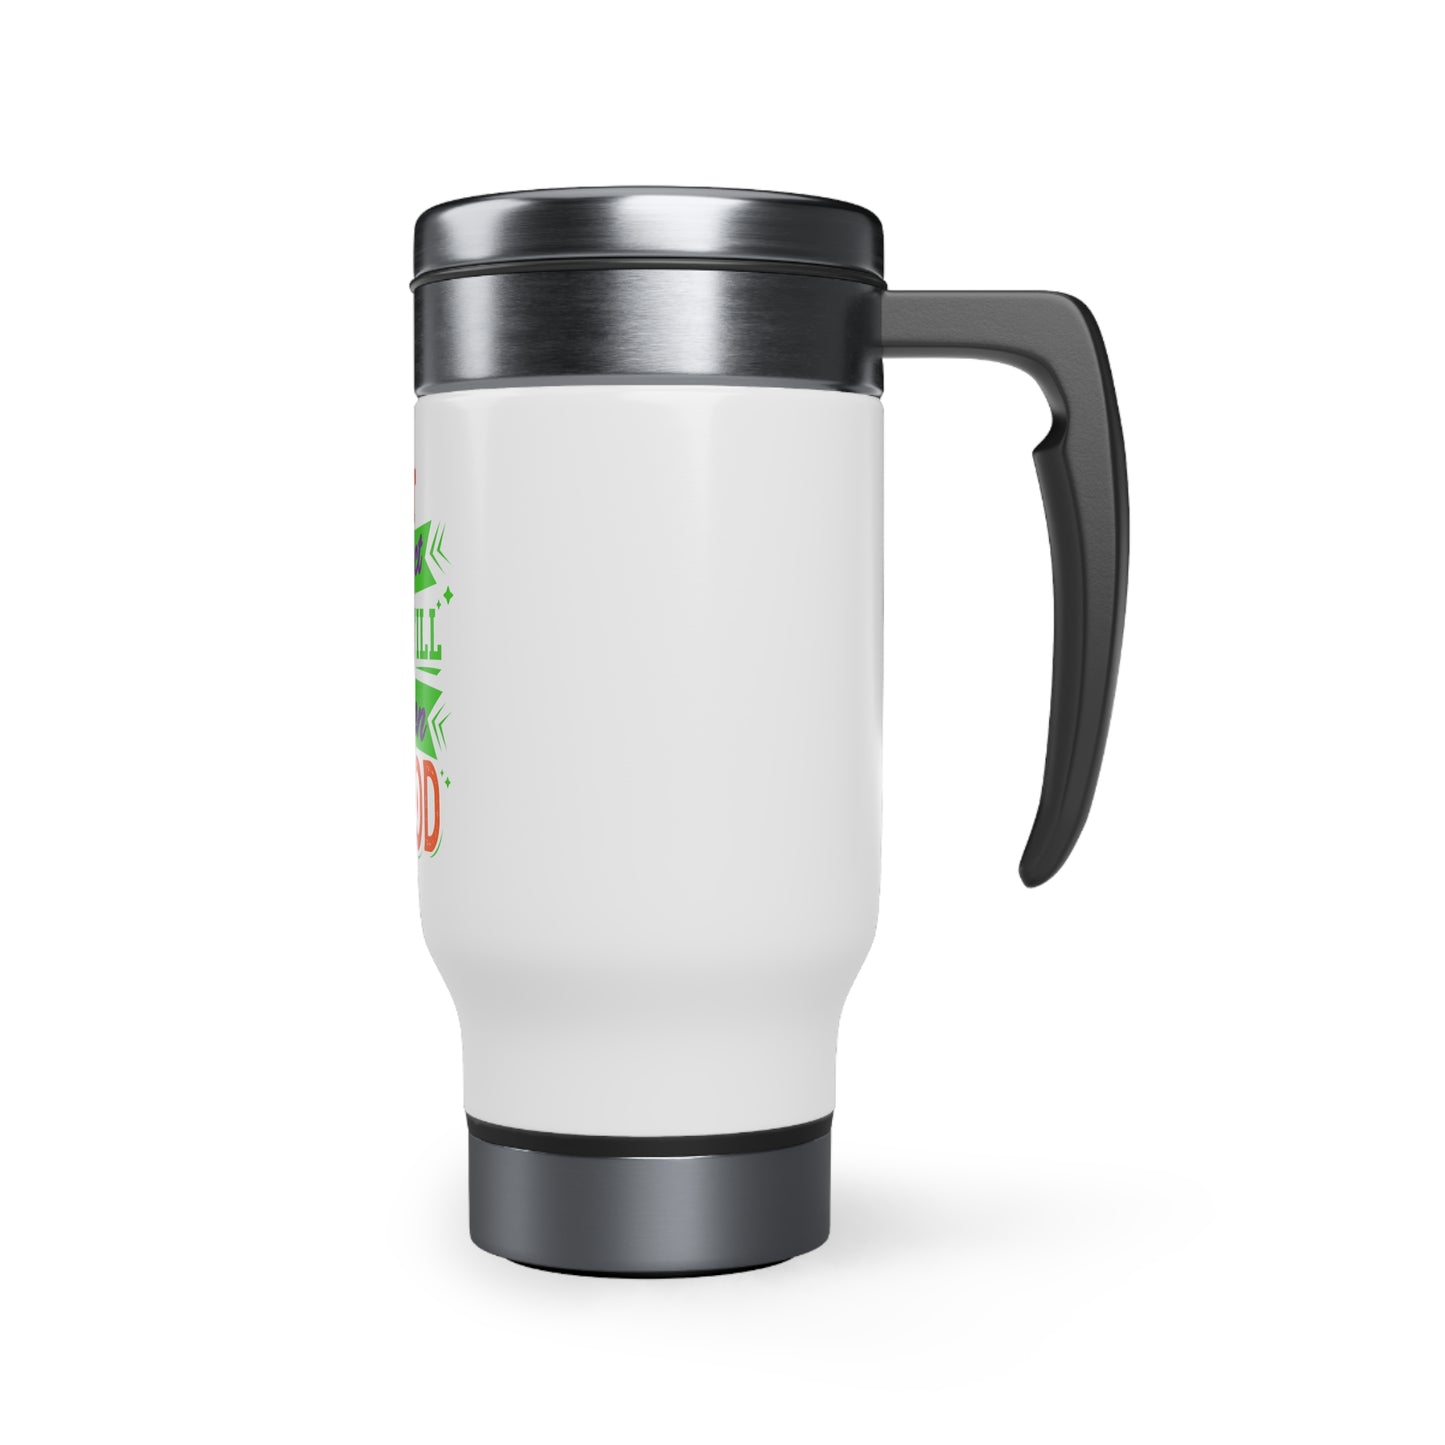 Not Perfect But Still Chosen By God (2) Travel Mug with Handle, 14oz